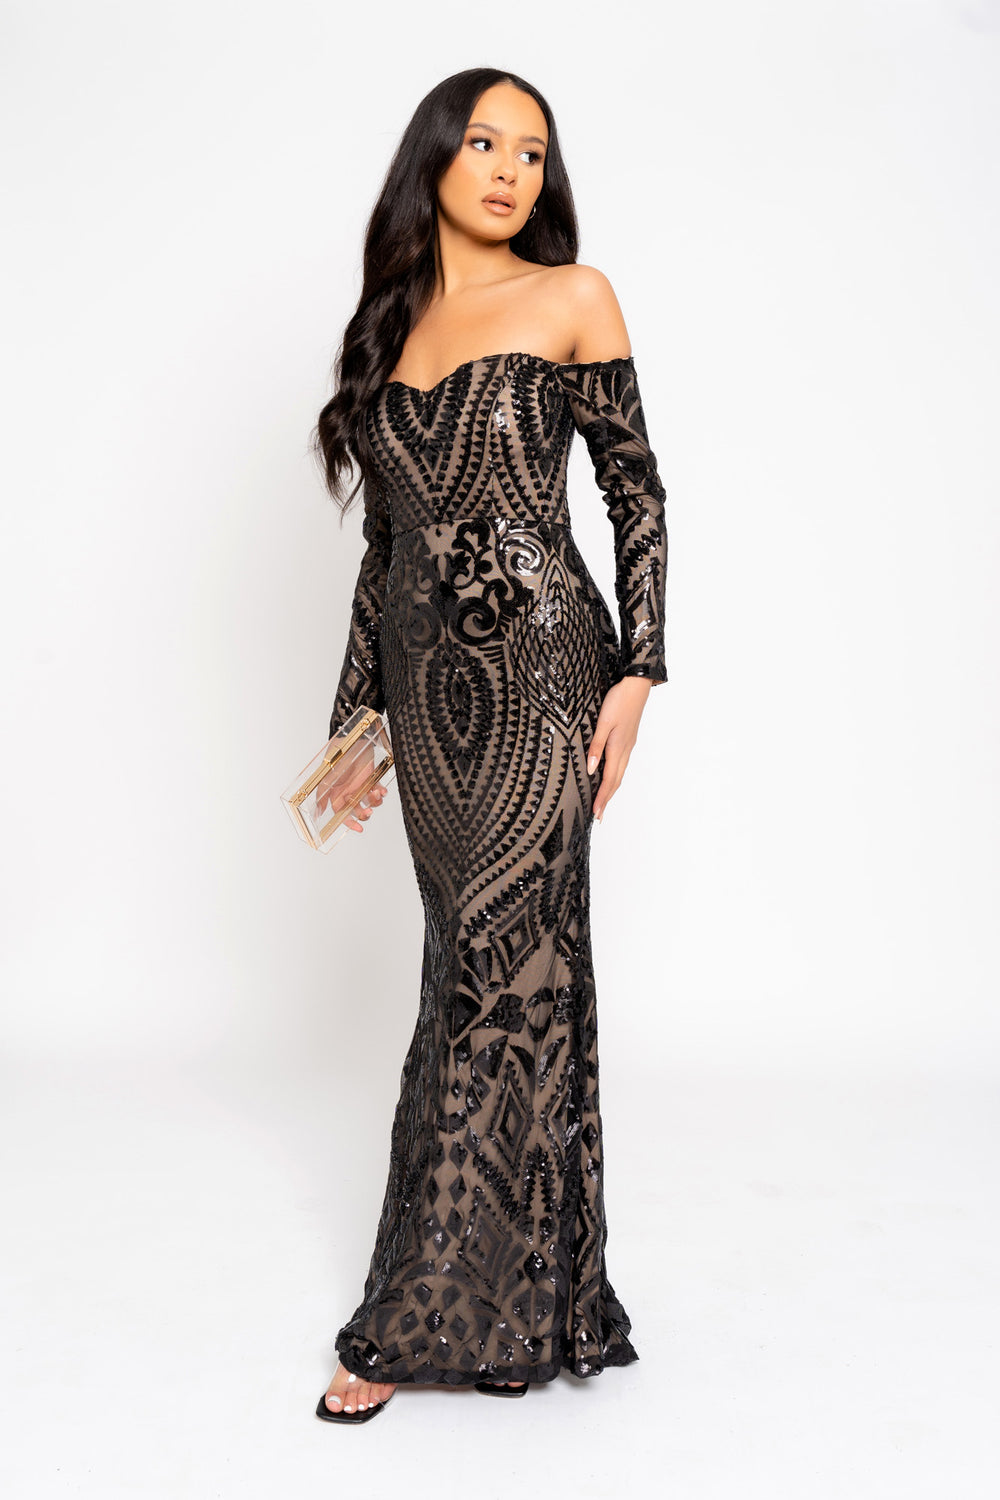 Ophelia Black Luxe Embellished Sequin Sweetheart Off Shoulder Long Sleeve Maxi Fishtail Dress